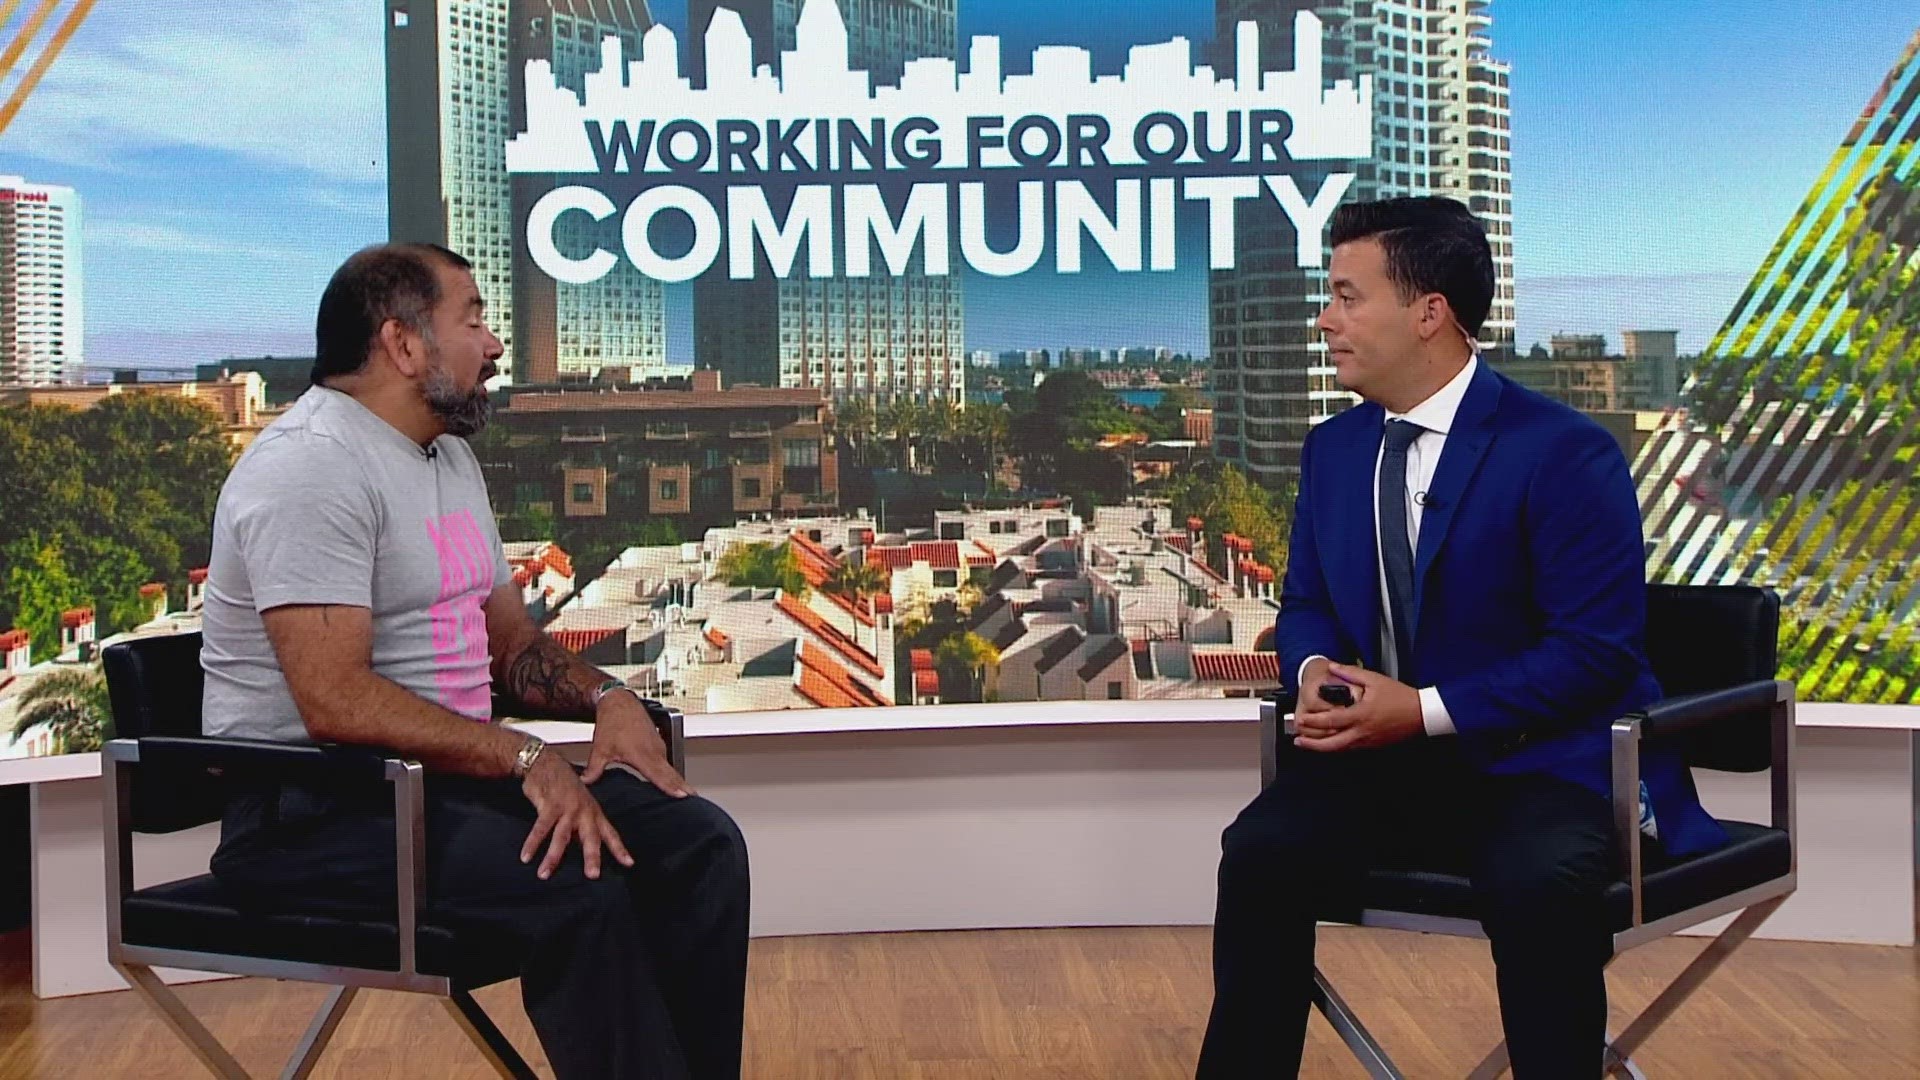 Ivan Alba joined CBS 8 to share more about Anvil of Hope, a local non-profit that works to support youth in underserved communities. More: AnvilofHope.org